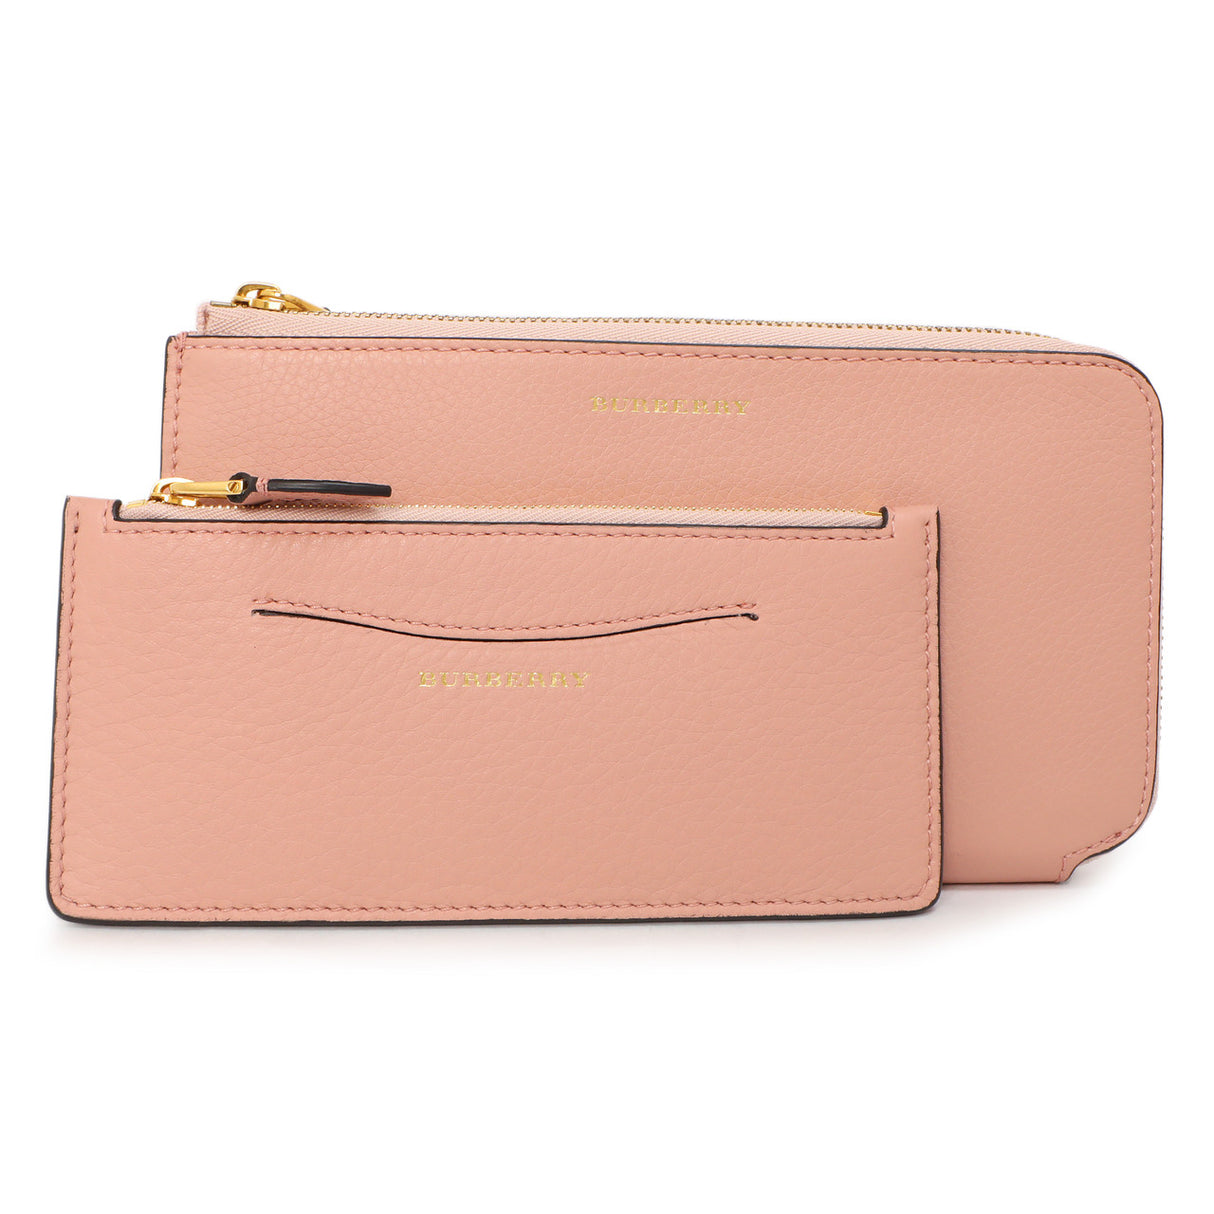 Burberry Pink Calfskin Zip Wallet With Coin Pouch